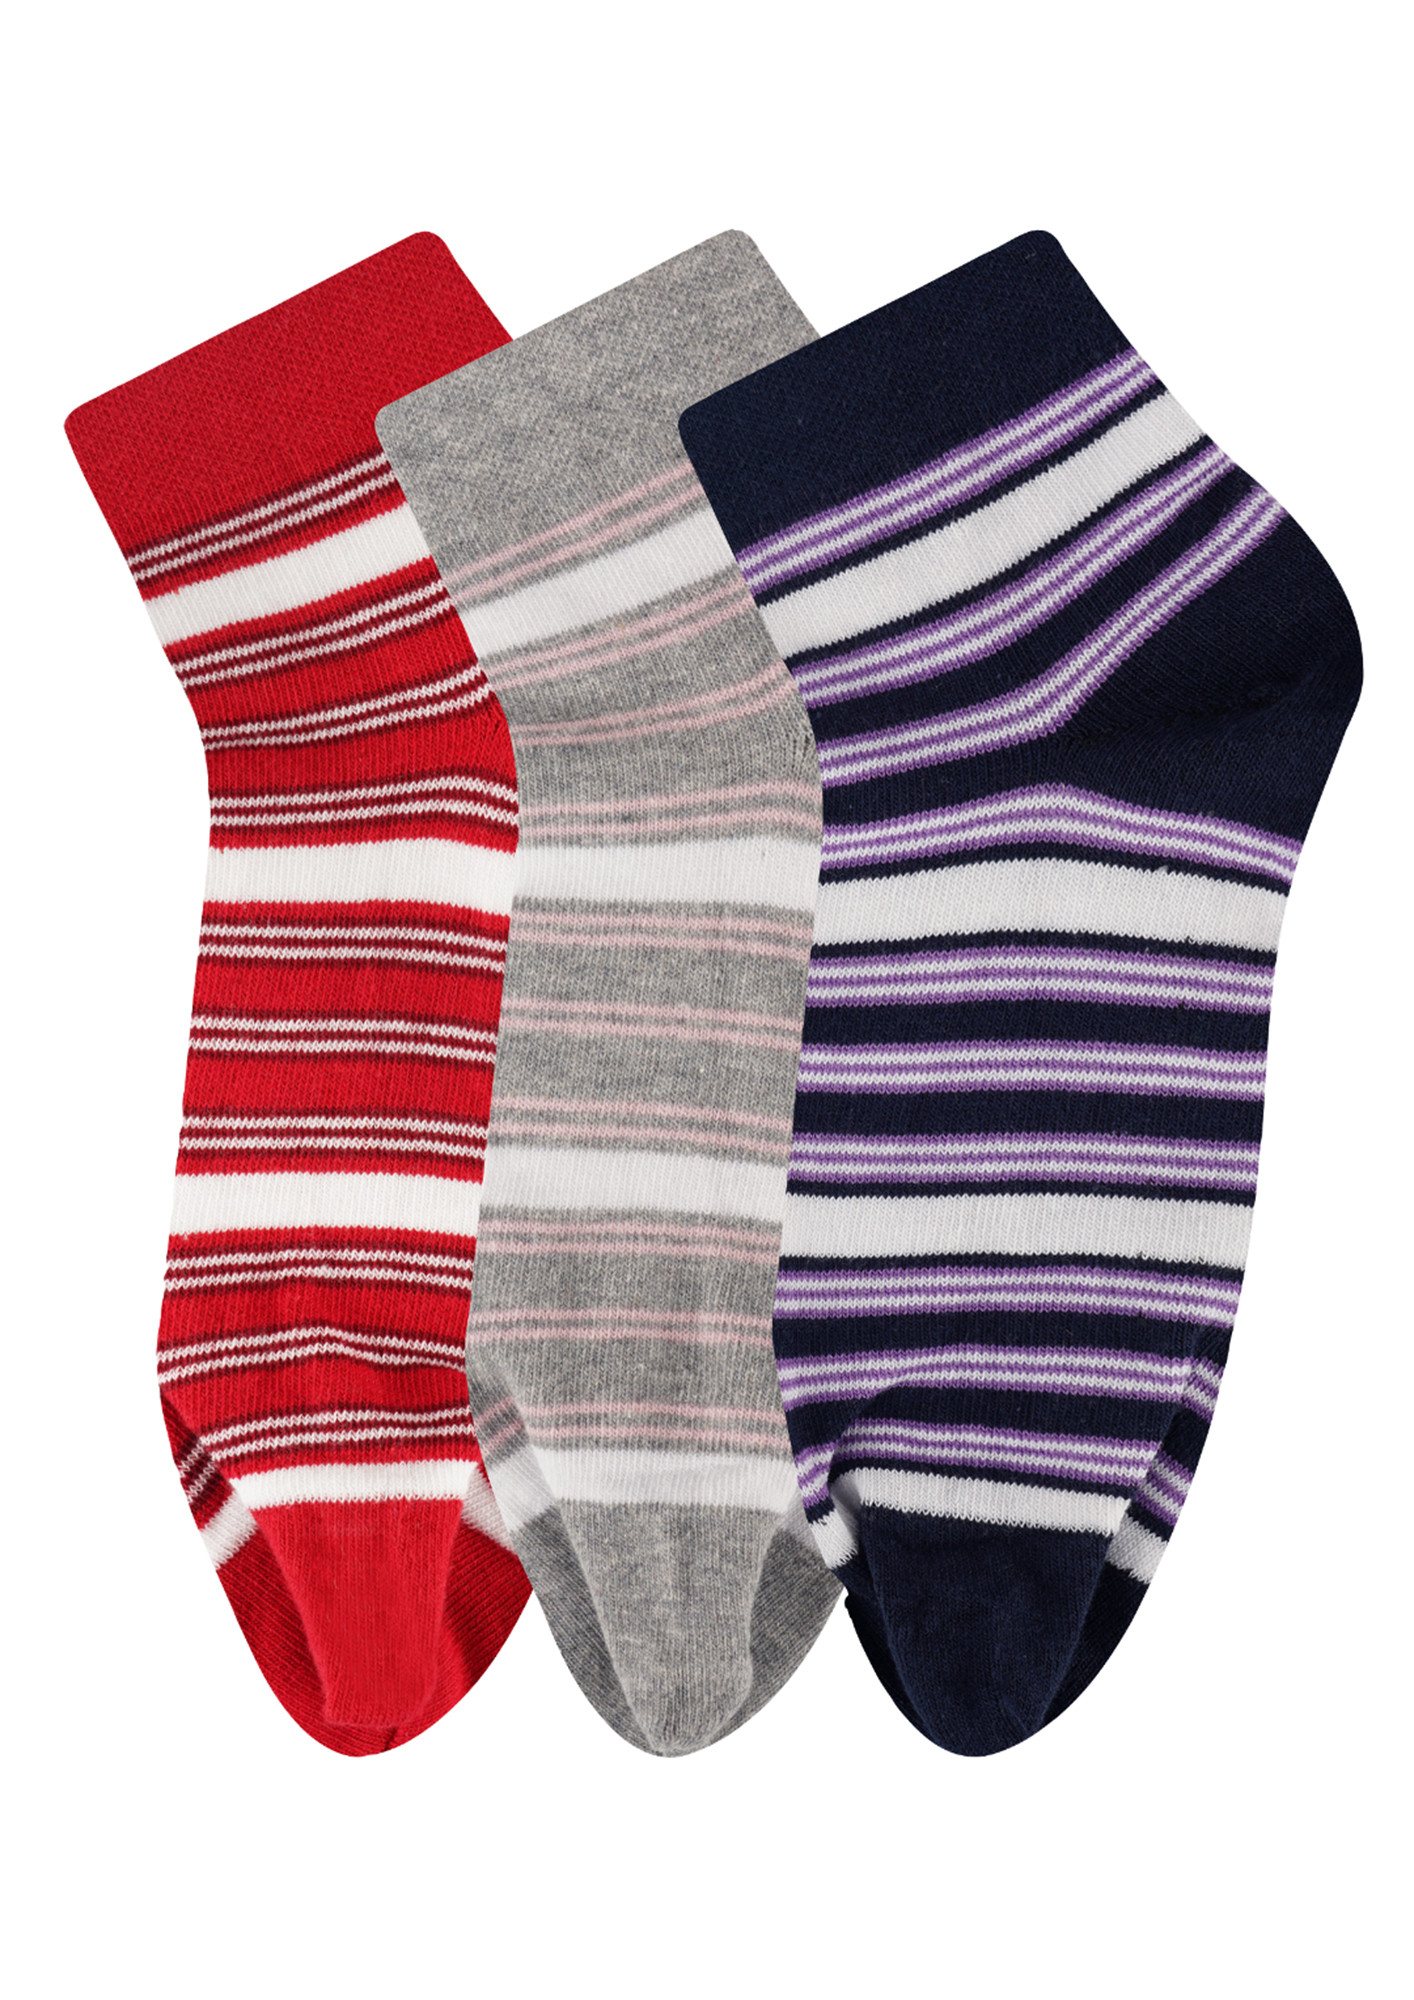 N2S NEXT2SKIN Women's Low Ankle Length Cotton Stripes Pattern Thumb Socks (Pack of 3) (Navy:Grey:Red)